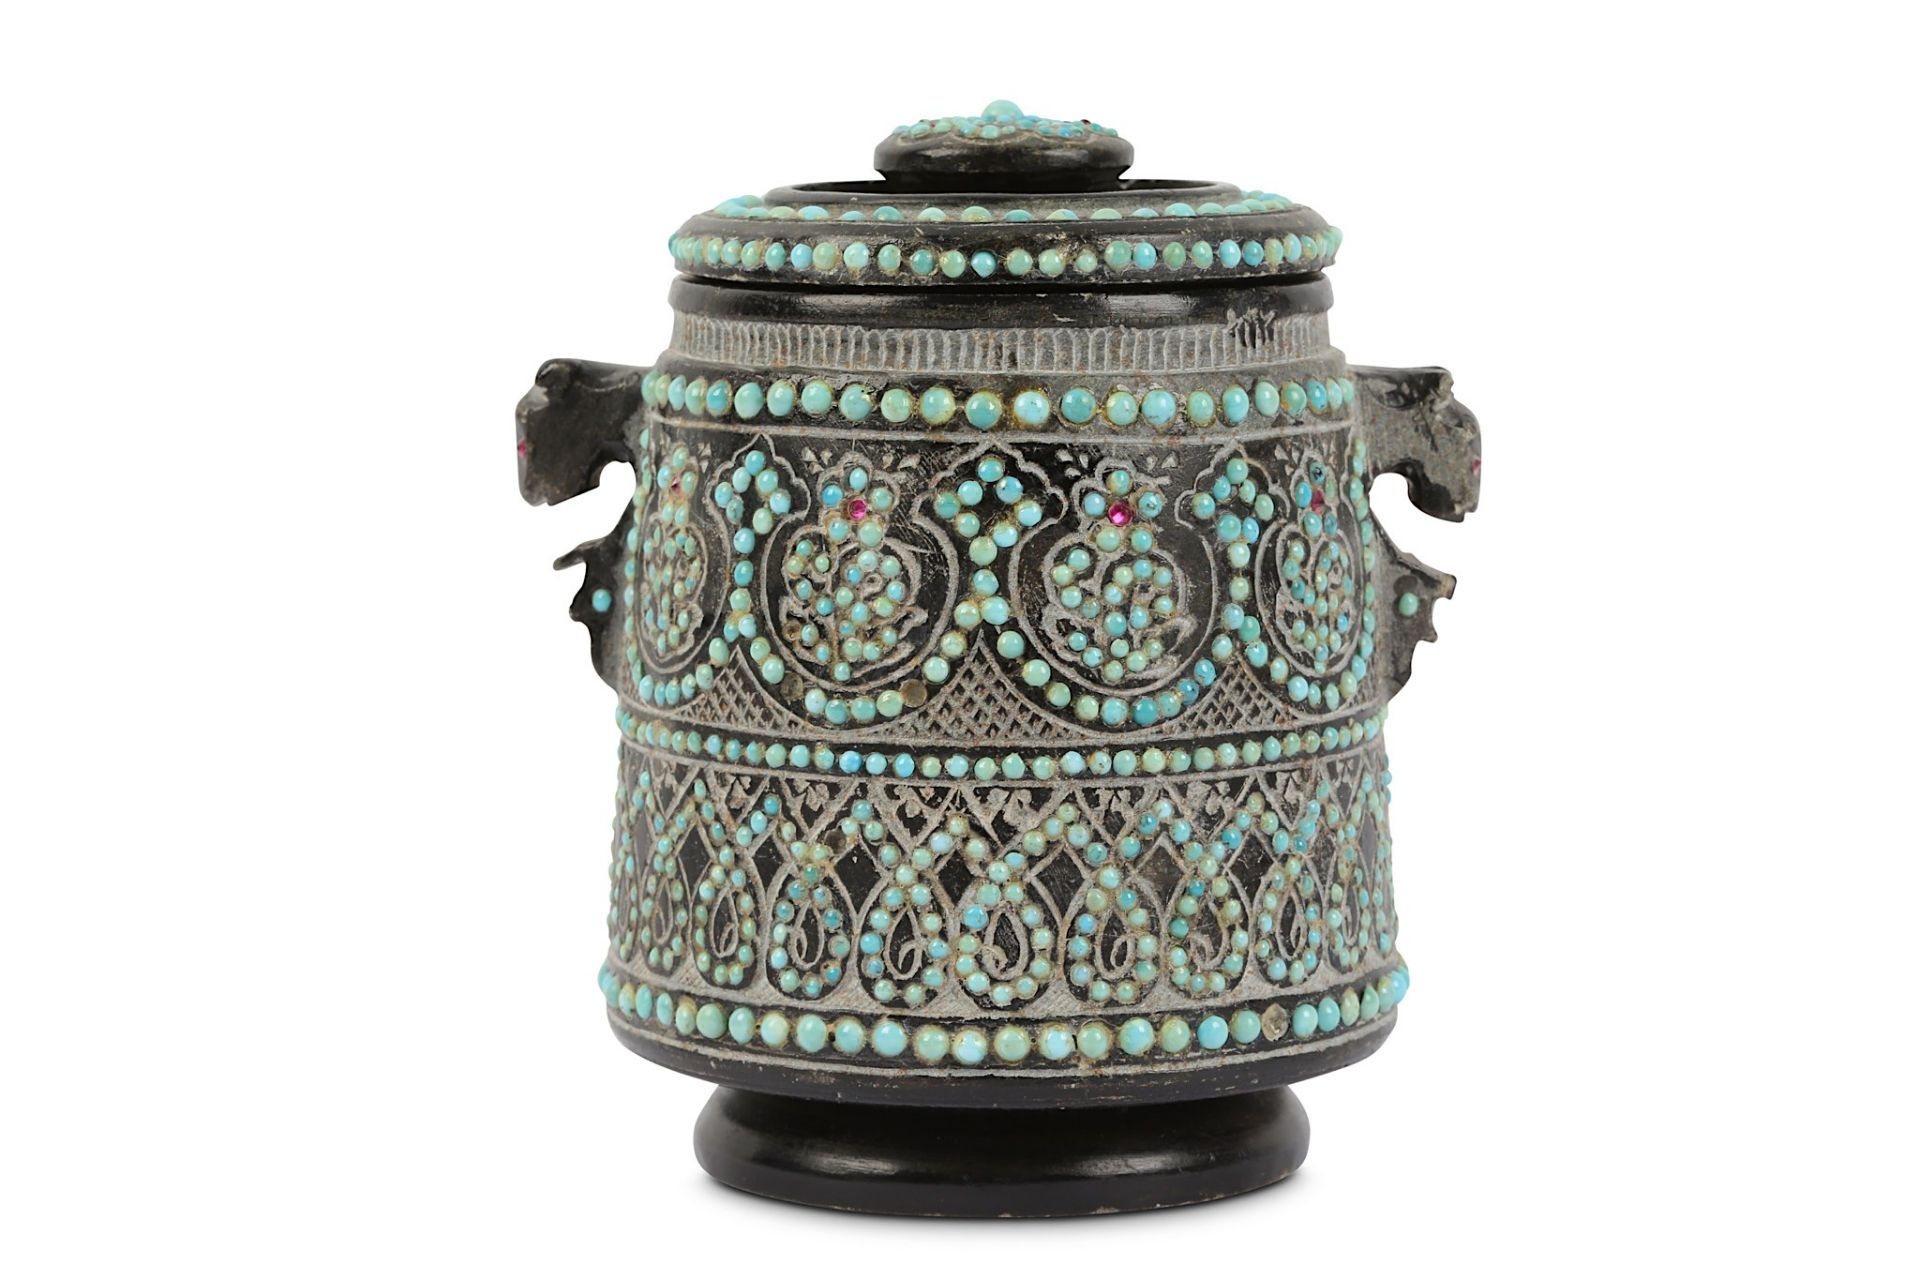 A TURQUOISE-ENCRUSTED CHAIDAN (TEA BOX) Iran, late 19th - early 20th century  Of cylindrical